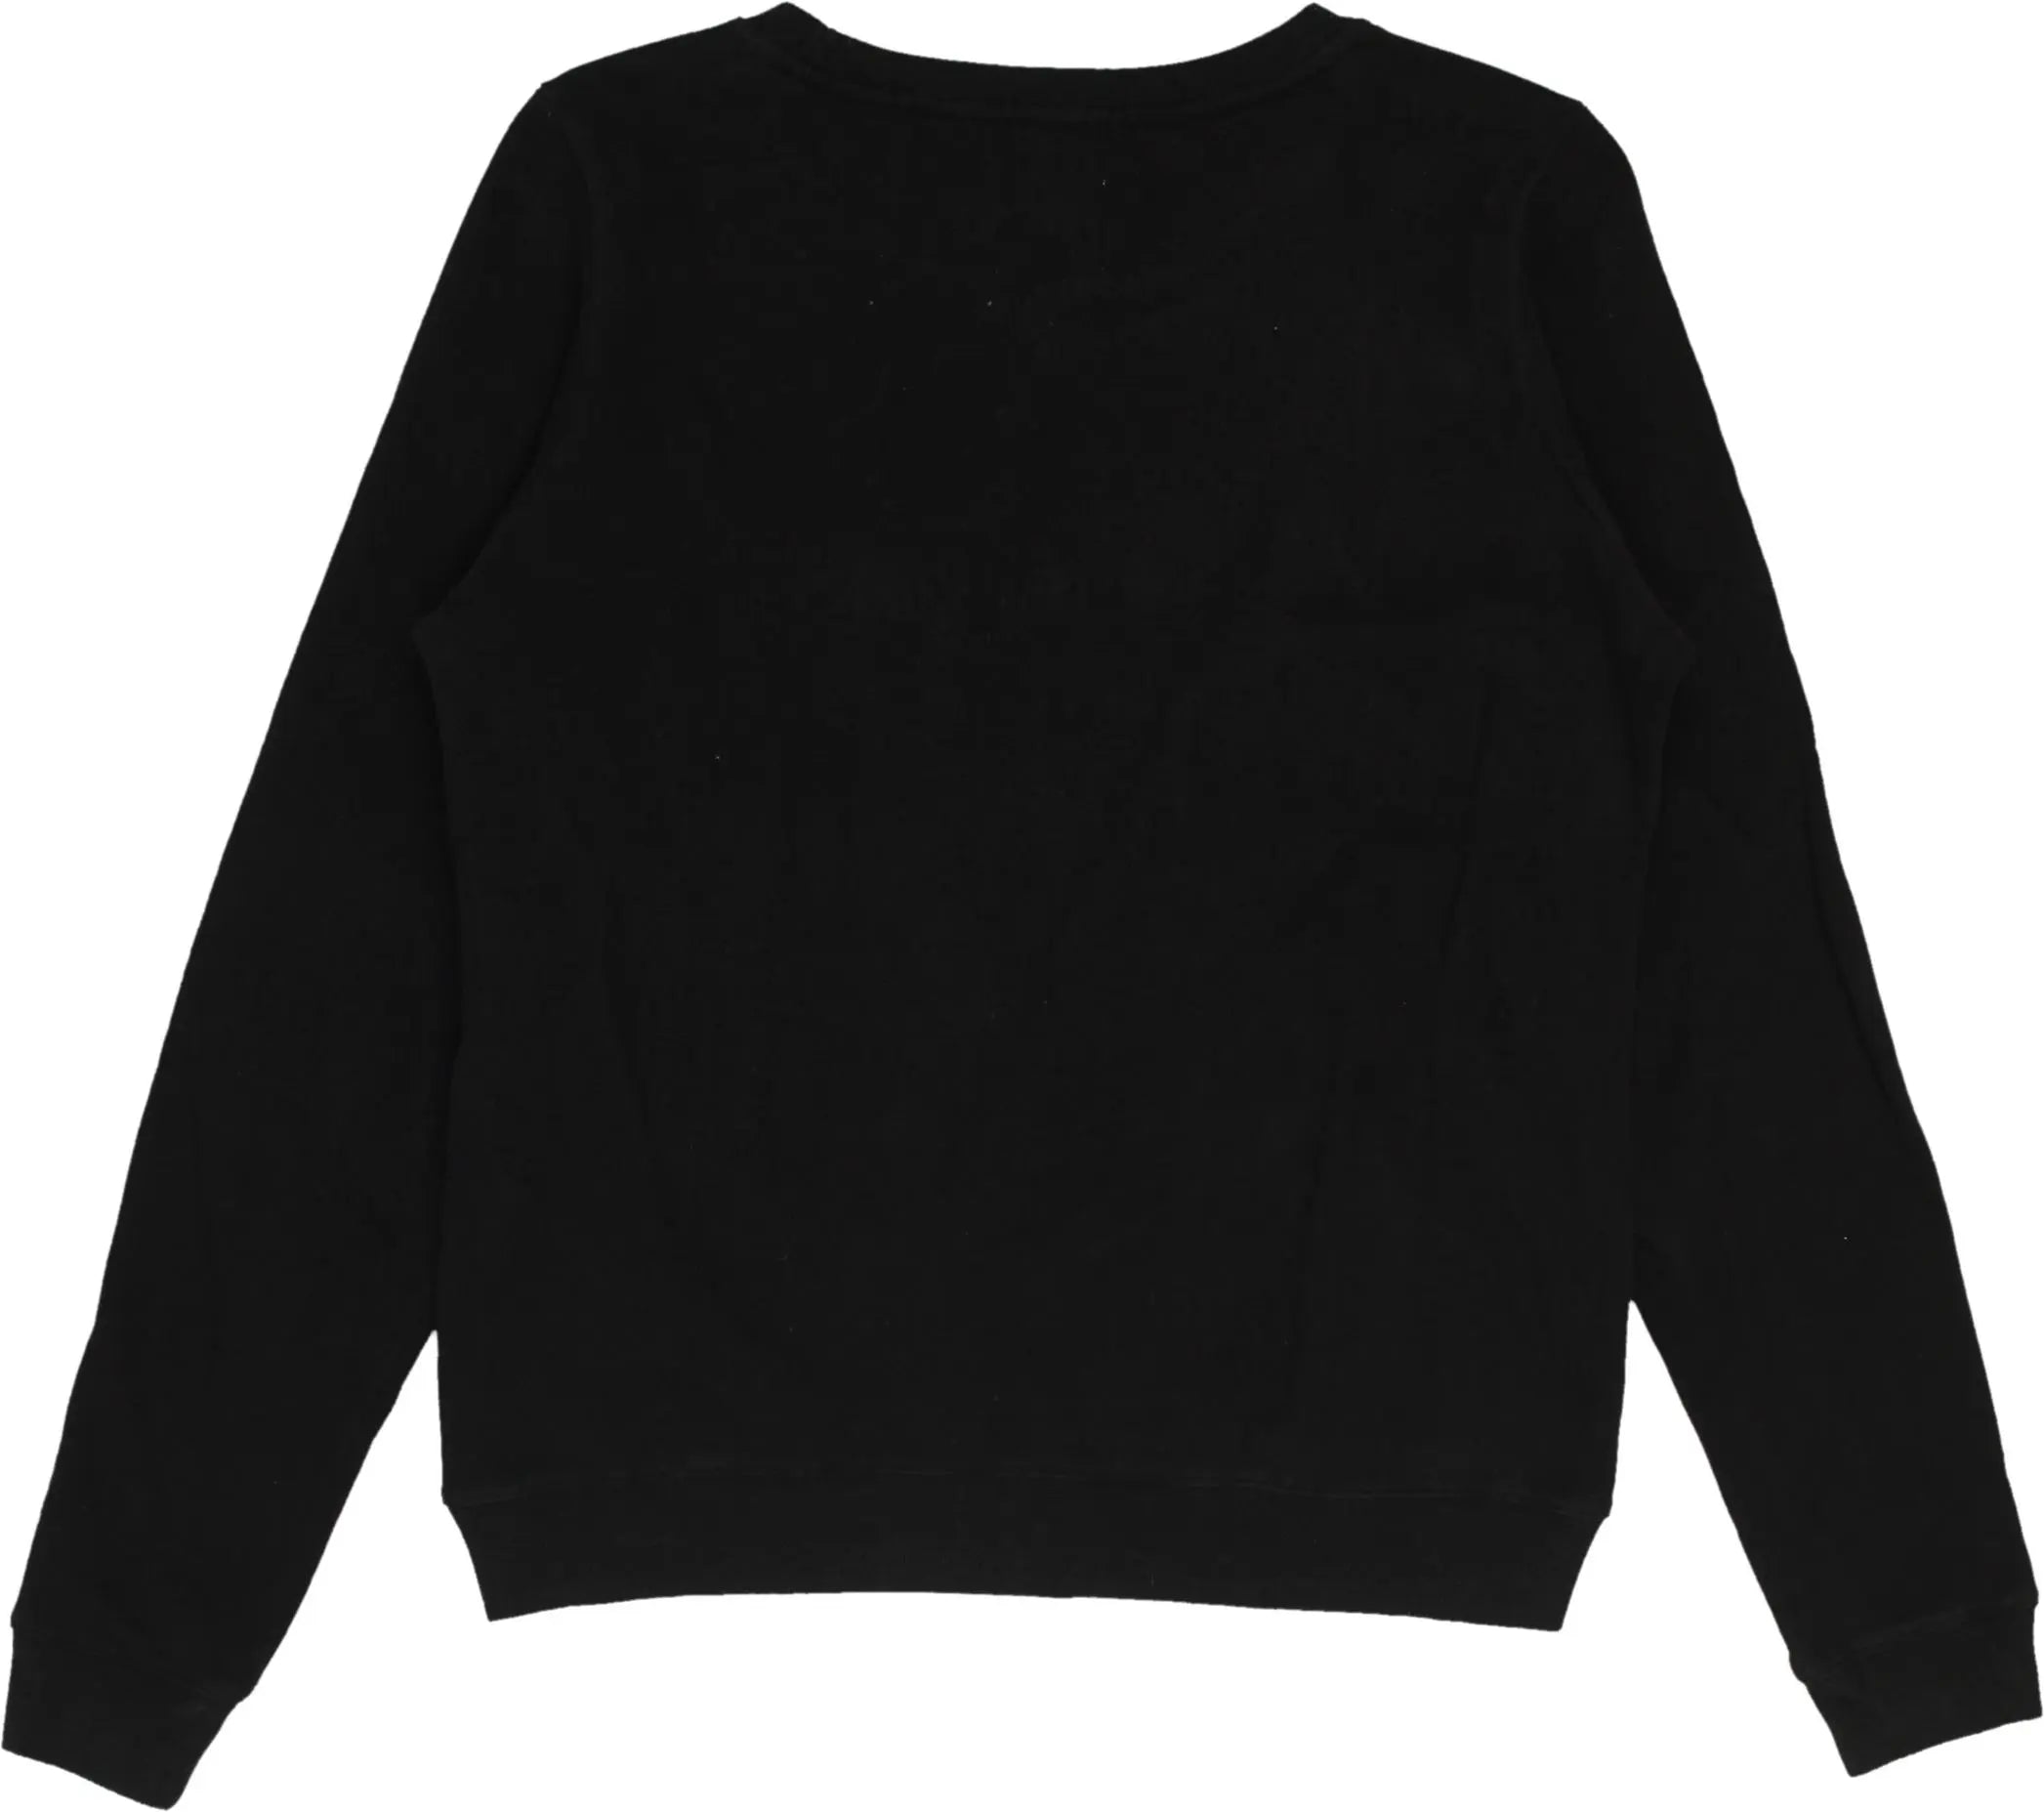 Cotton Club - Sweater- ThriftTale.com - Vintage and second handclothing